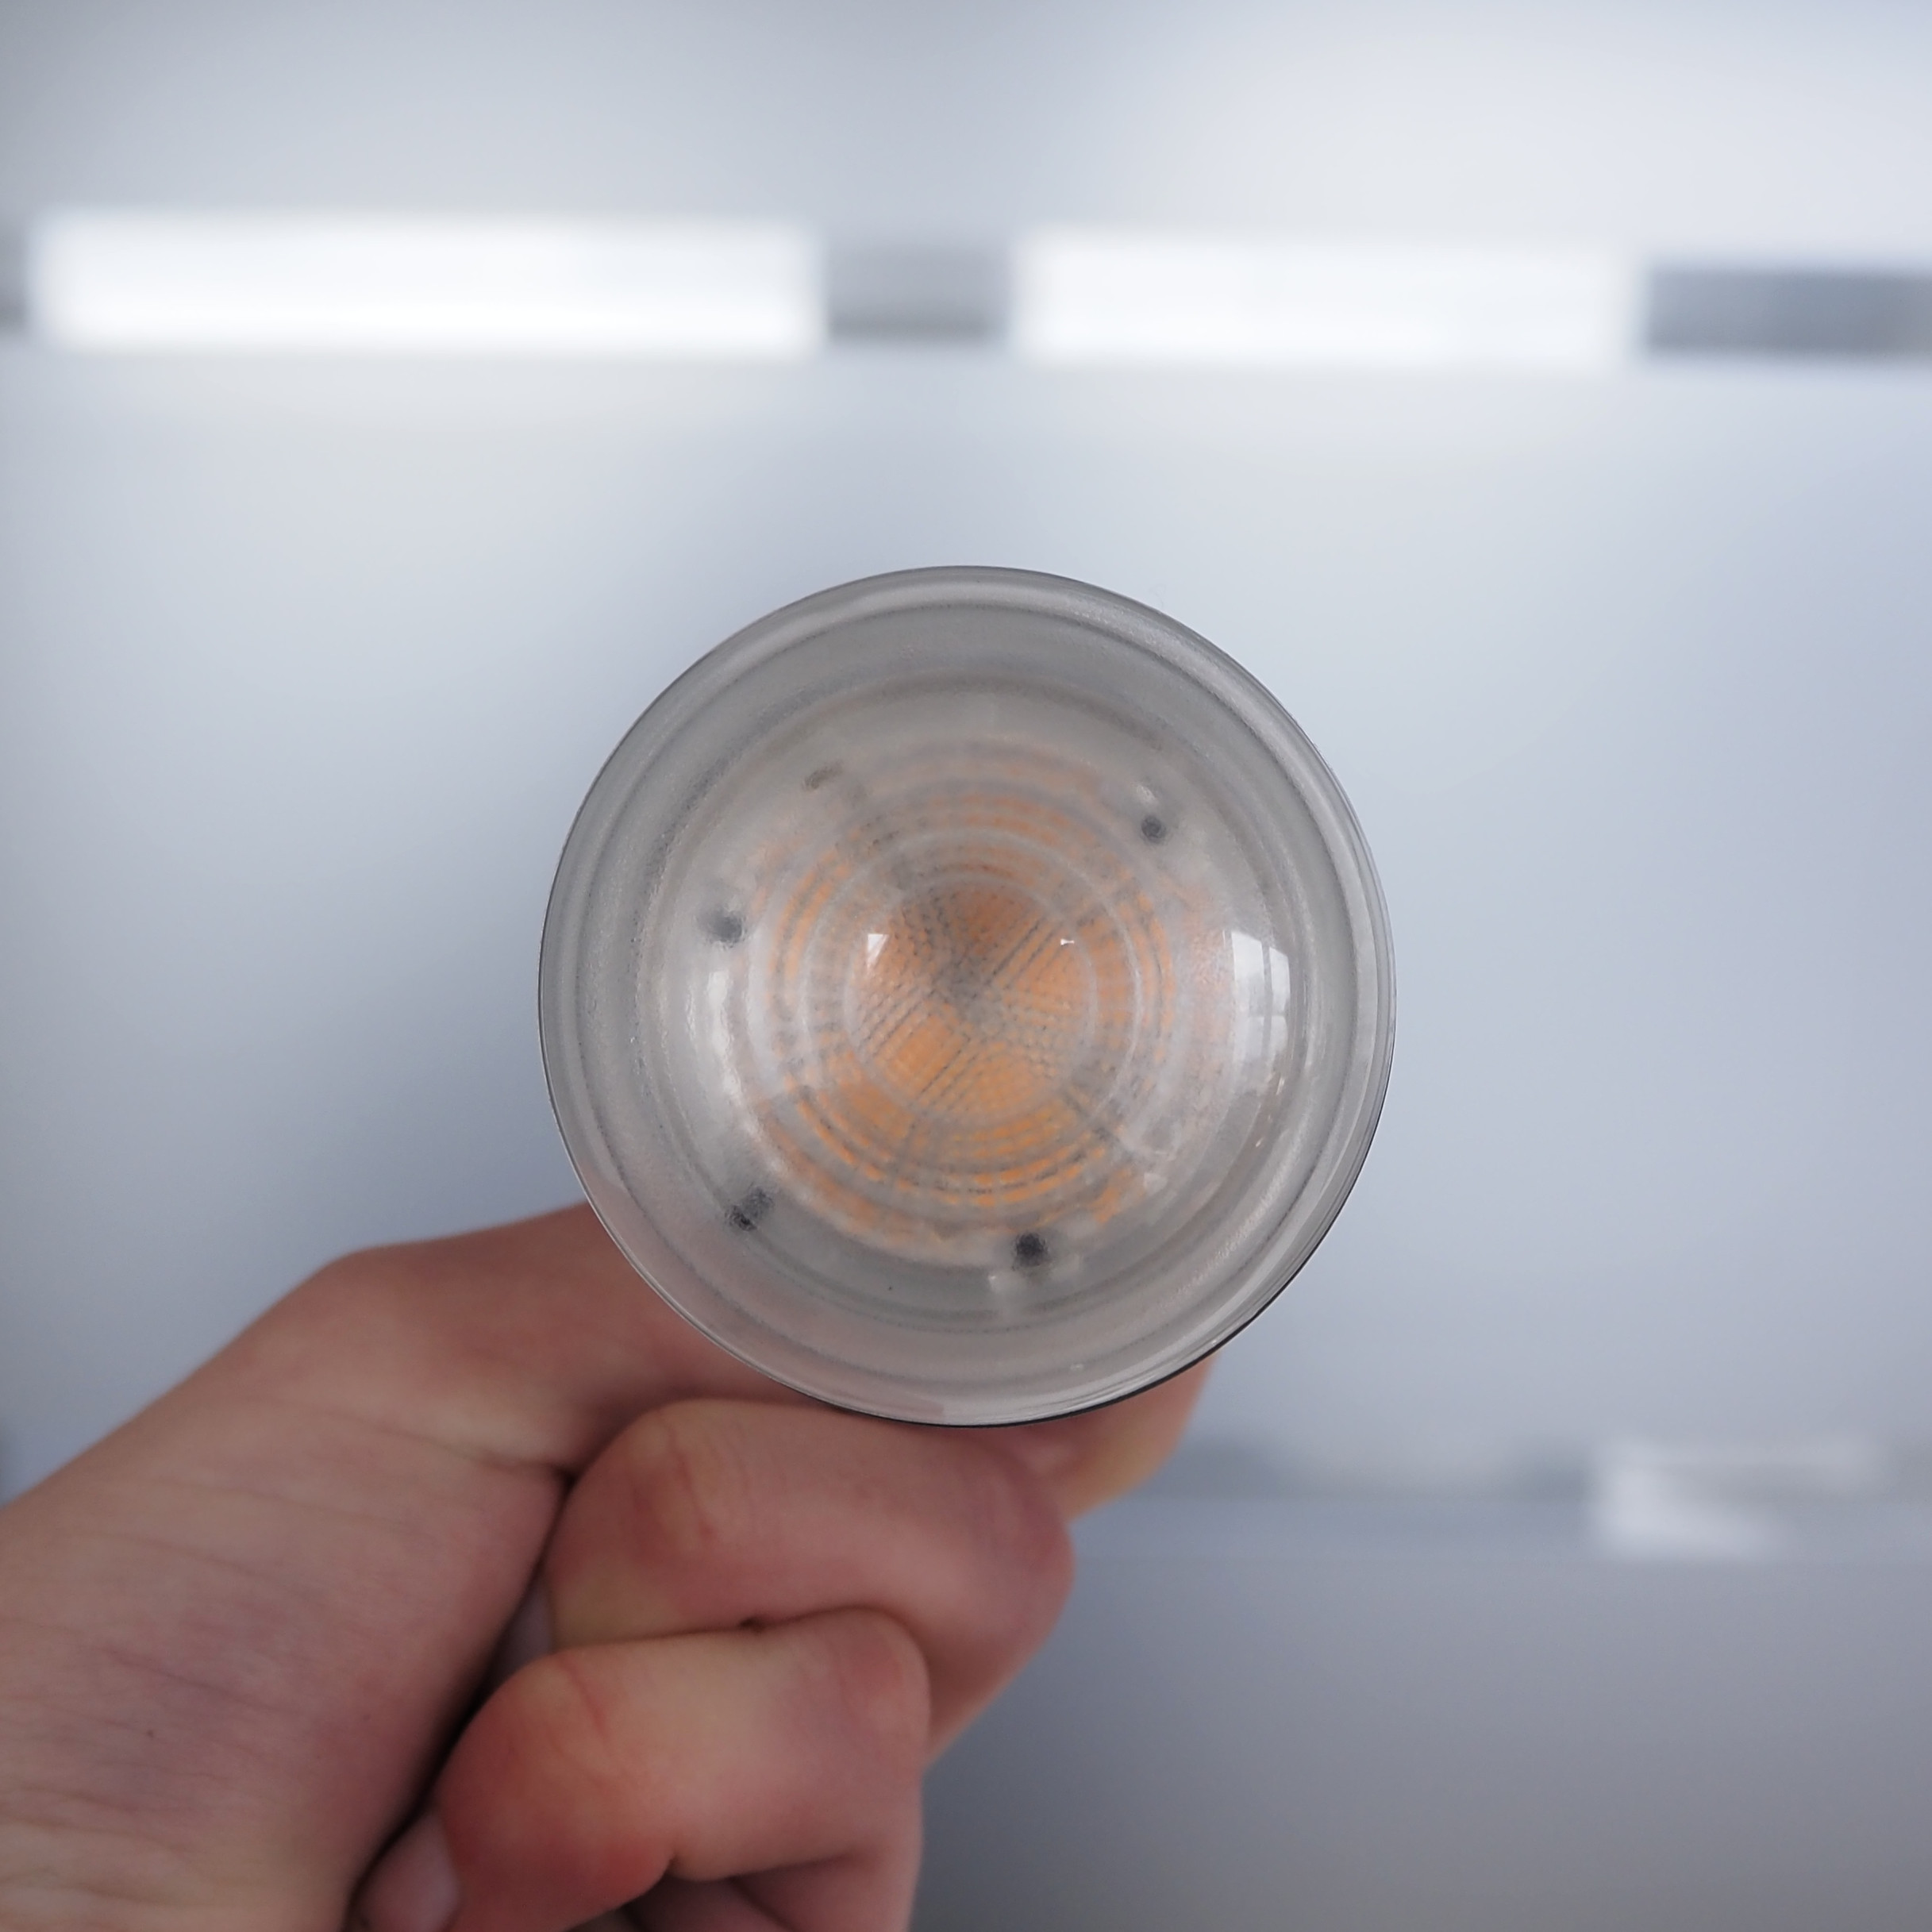 Bulb &quot;Led superstar R50 60 36°&quot; by Osram (E14, Dimmable)